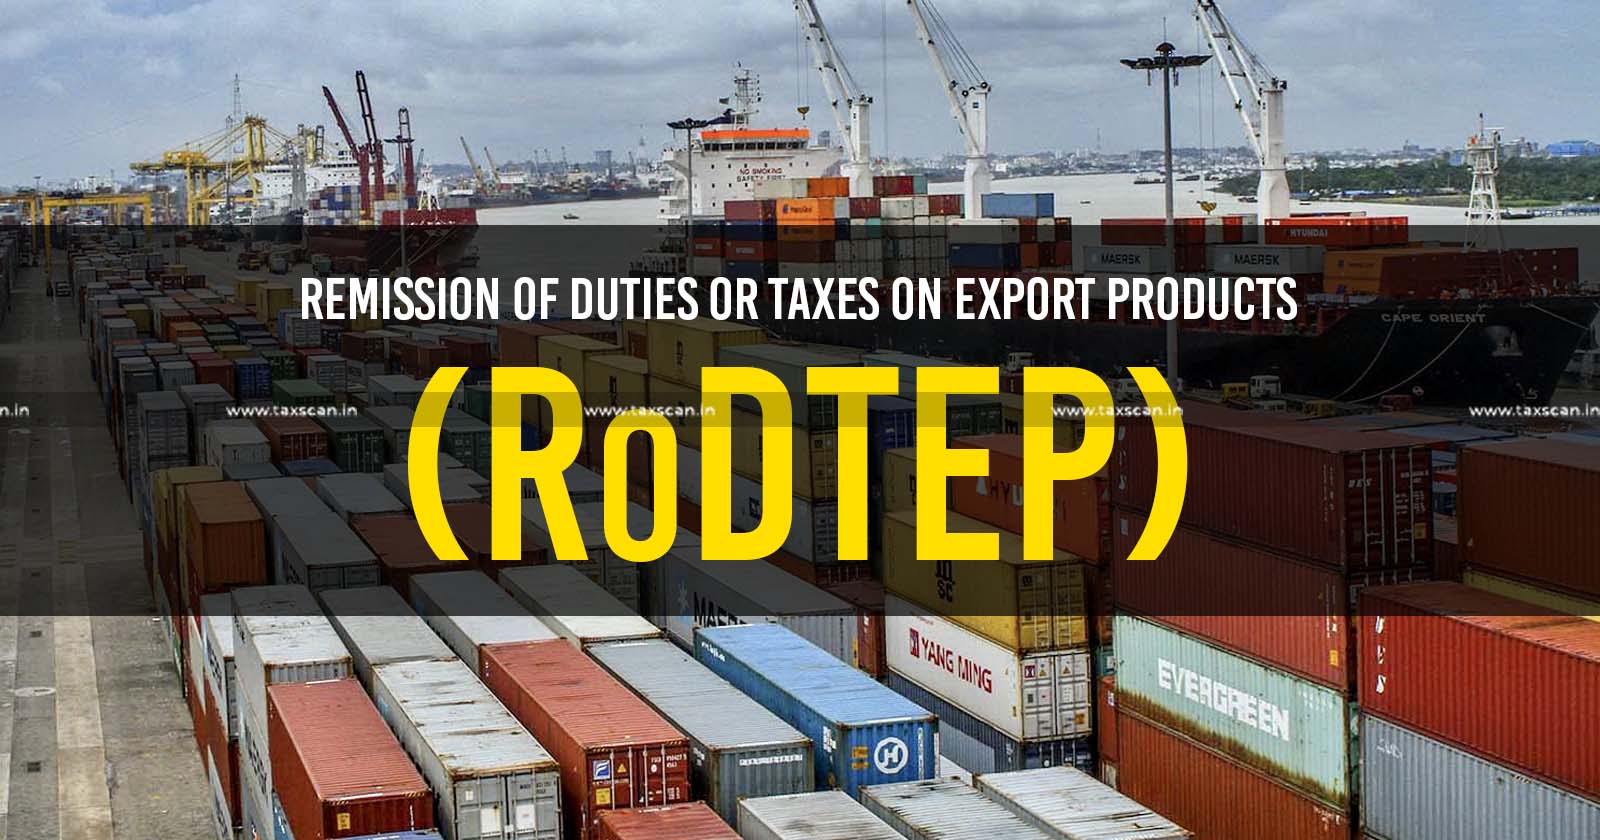 DGFT - DGFT notifies Regularization of Remission of Duties or Taxes on Export Products - Remission of Duties or Taxes on Export Products - Taxscan